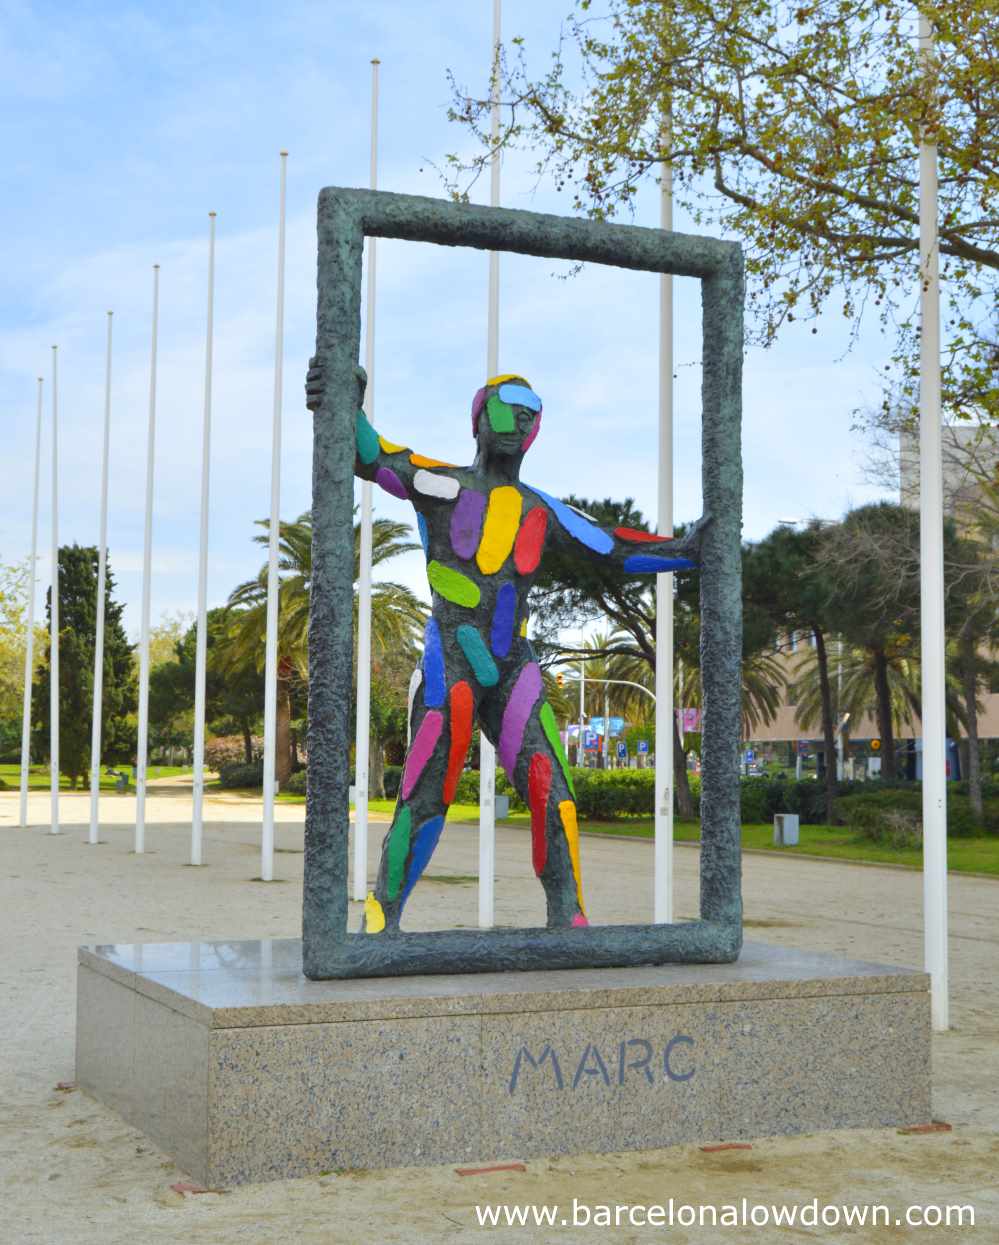 Statue of Marc in the 1992 Olympic Village, Barcelona